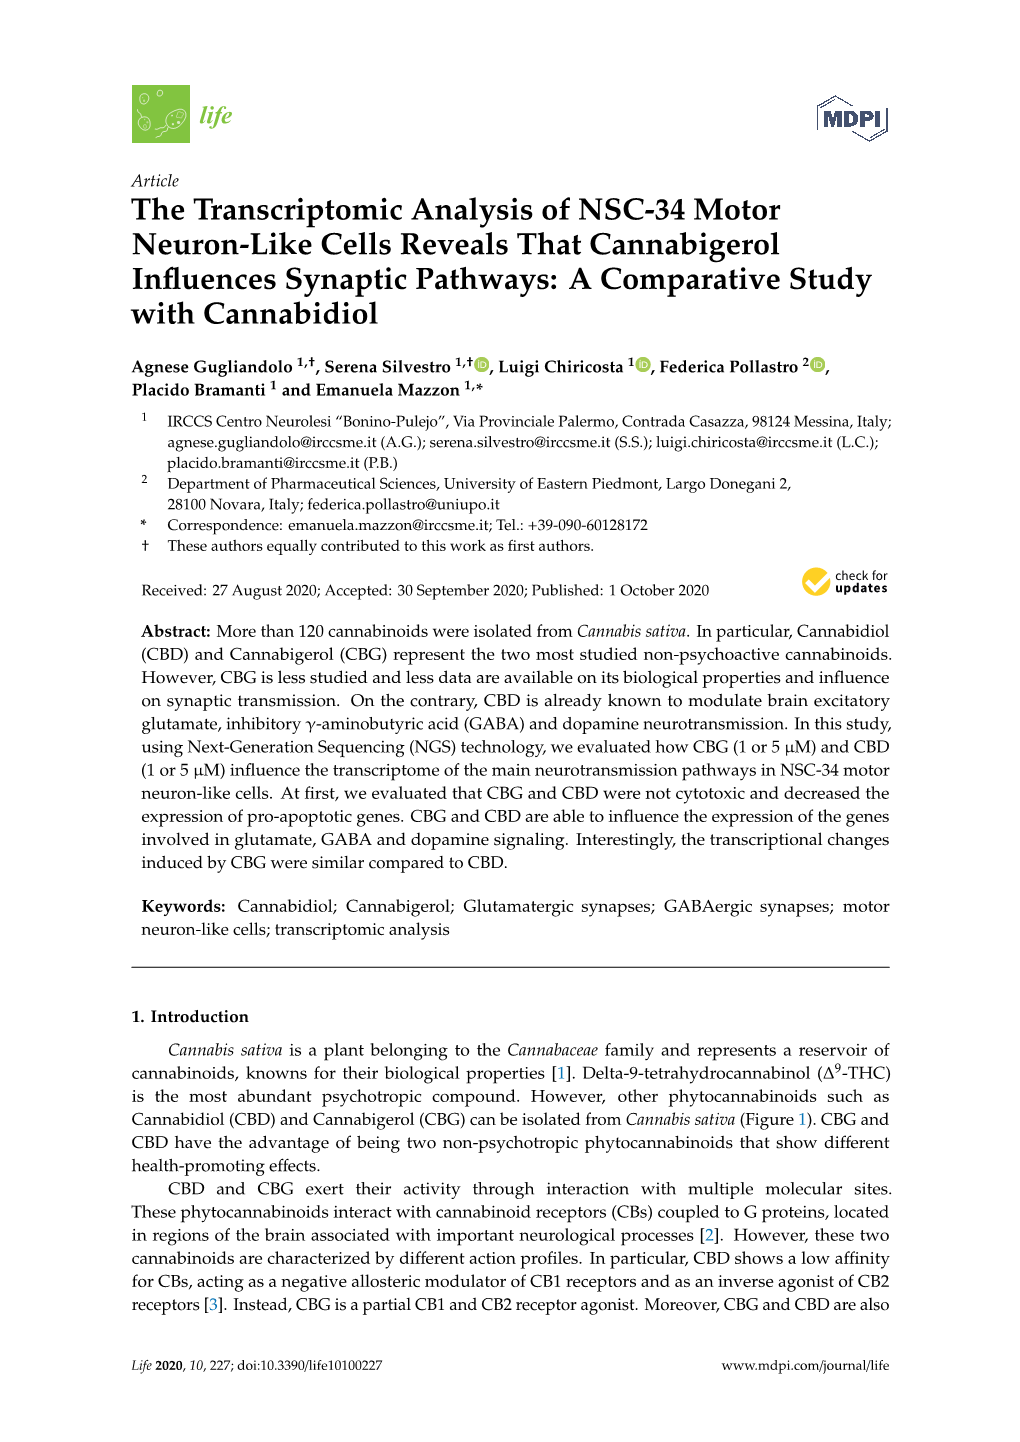 The Transcriptomic Analysis of NSC-34 Motor Neuron-Like Cells Reveals That Cannabigerol Inﬂuences Synaptic Pathways: a Comparative Study with Cannabidiol